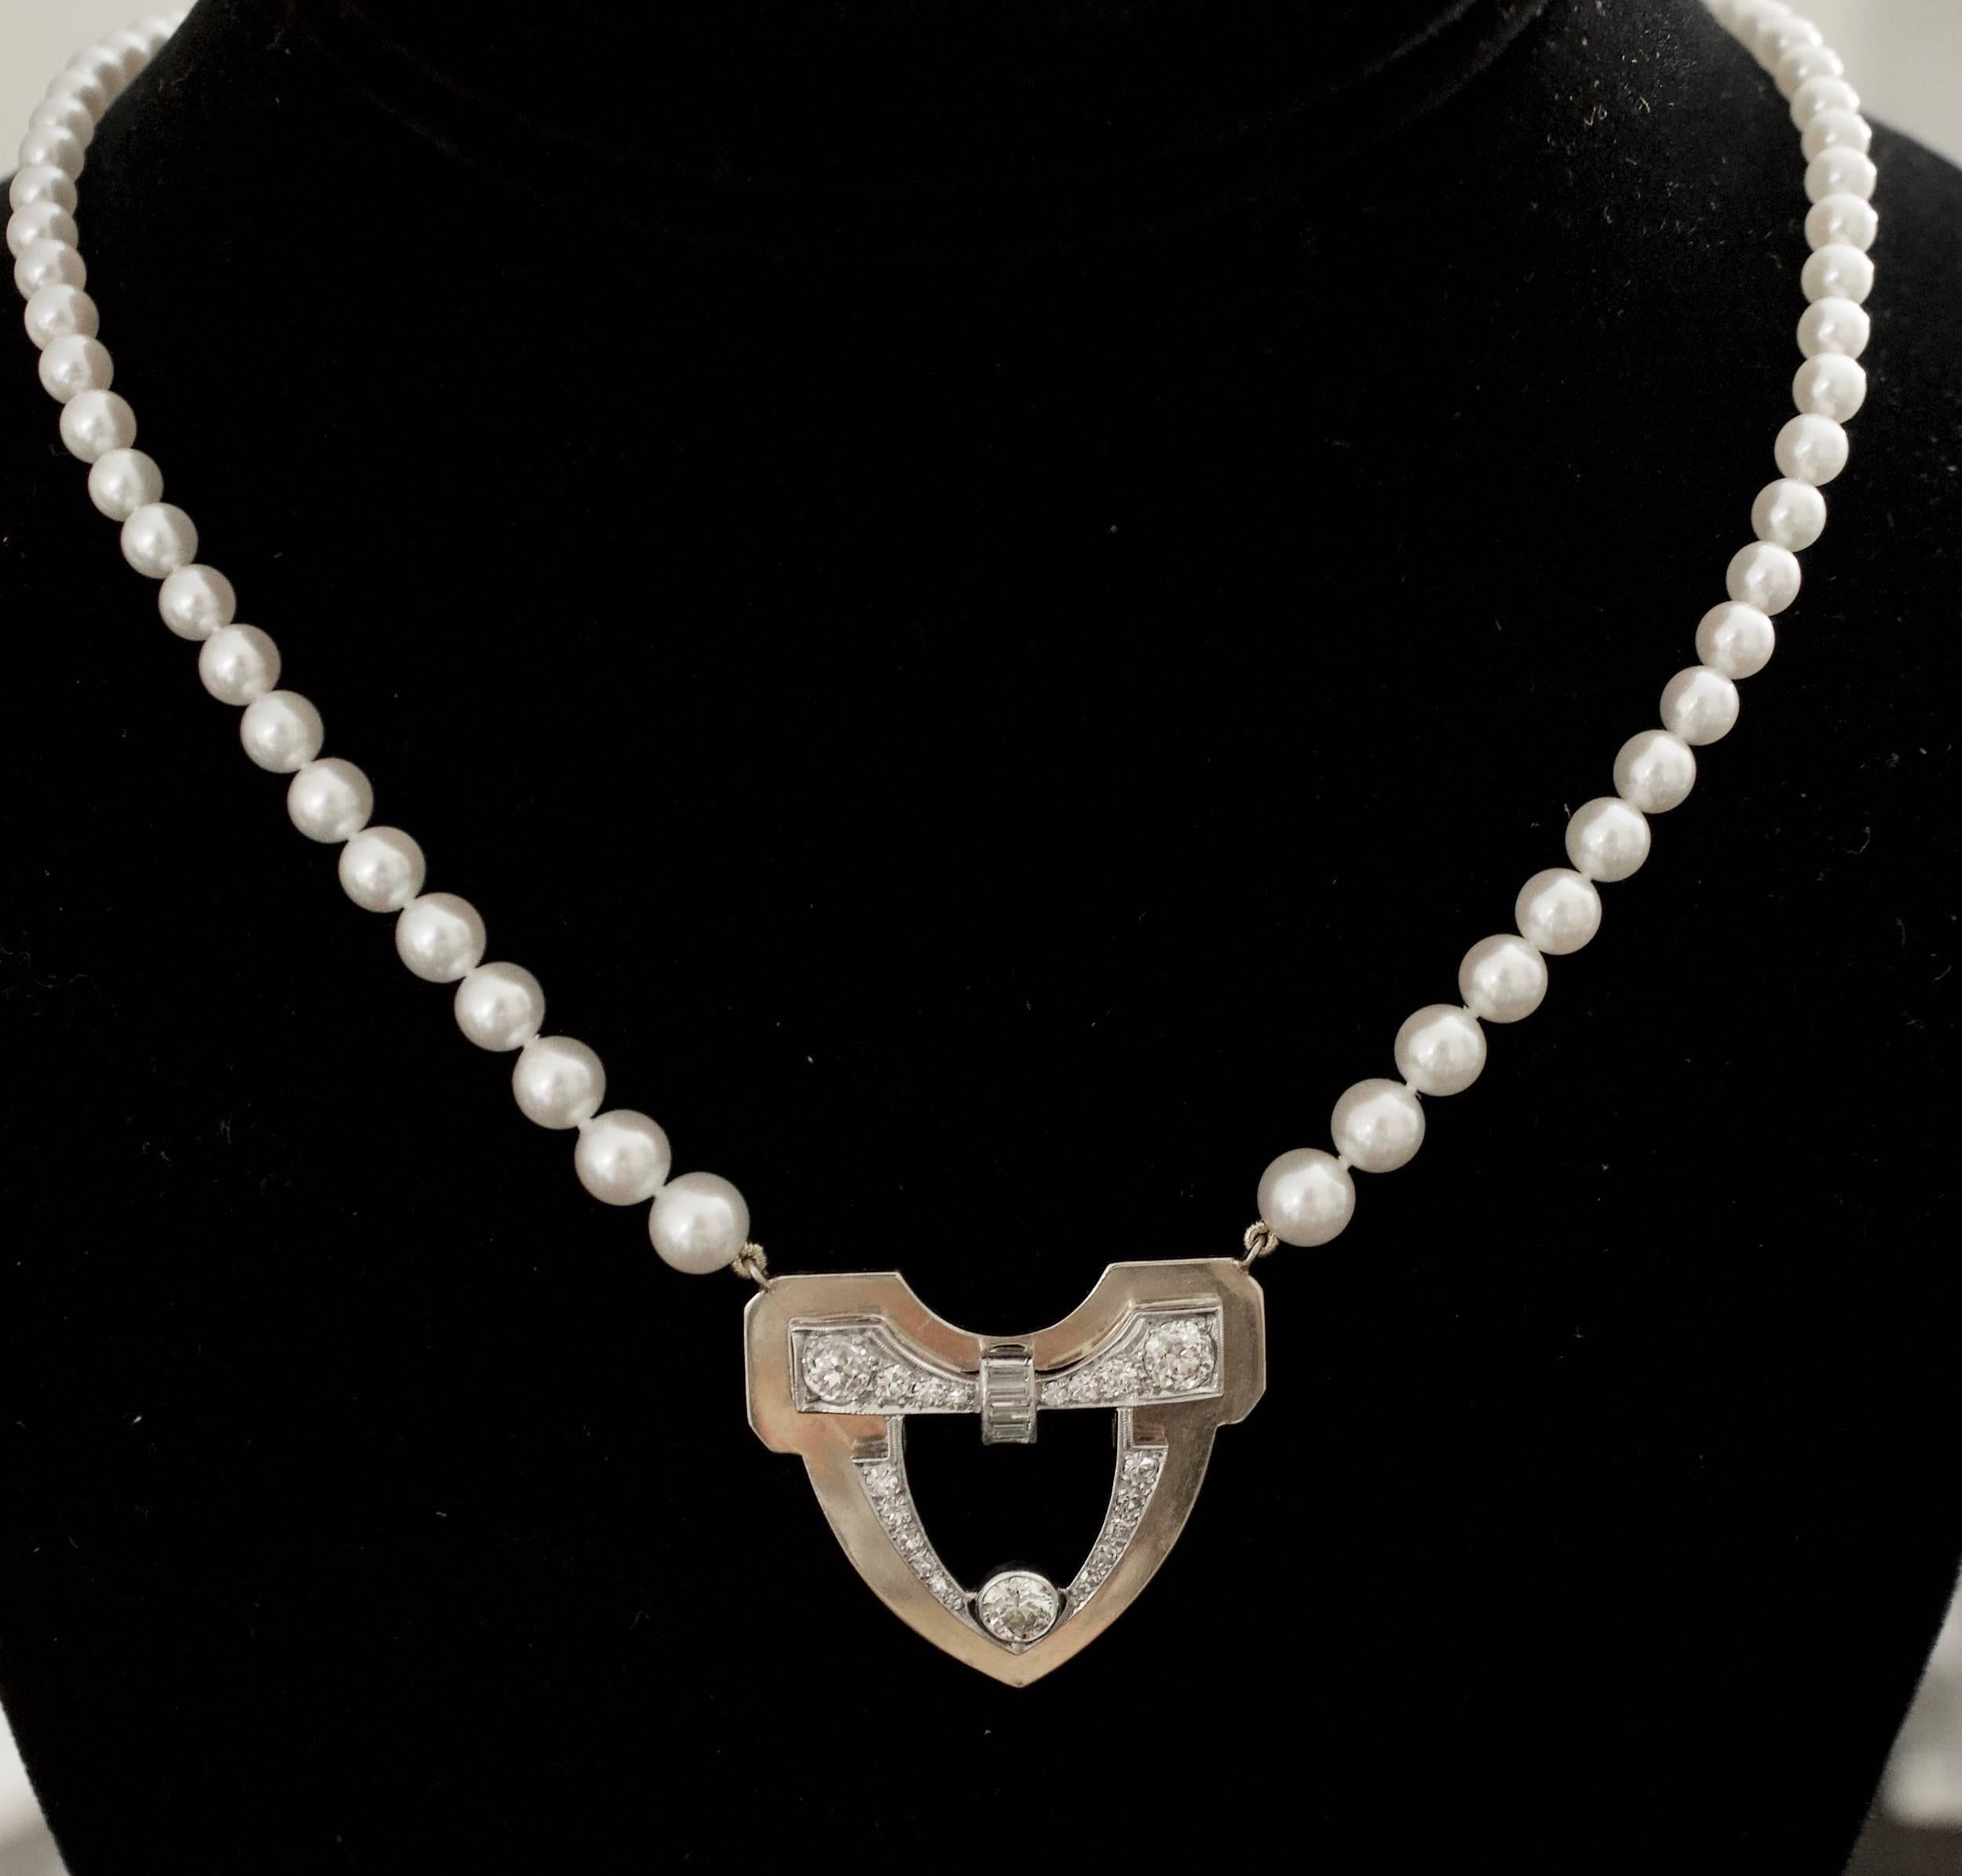 Platinum and Yellow Gold Circa 1930's-1950's Diamond and Pearl Neckllace
One Old European Cut Diamonds weighing .45 carats approximately [GH-VS2]
Twenty Round and Baguette  Cut Diamonds weighing 1.55 carats approximately [GH VS-SI]
Eighty Four Round